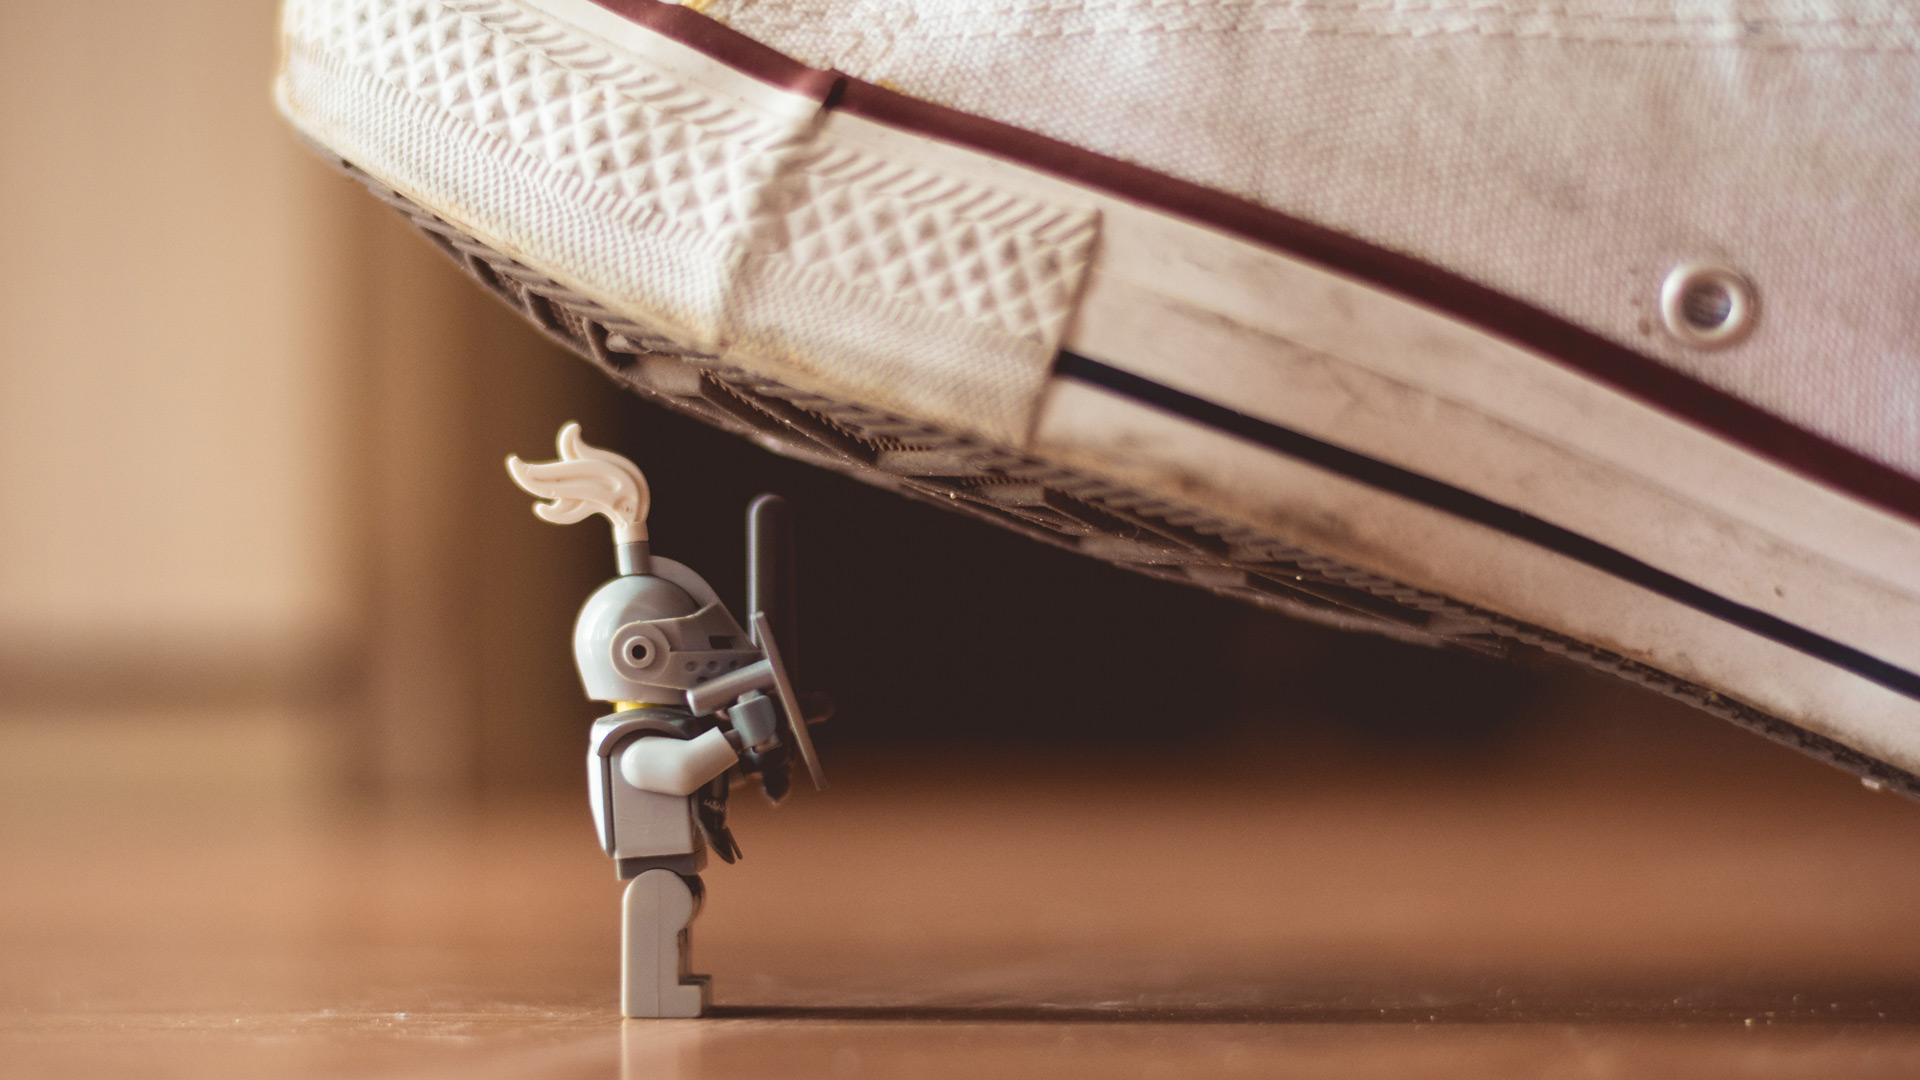 Lego knight with sword stand firm even though seemingly about to get squashed by a much larger foe (James Pond unsplash.com)